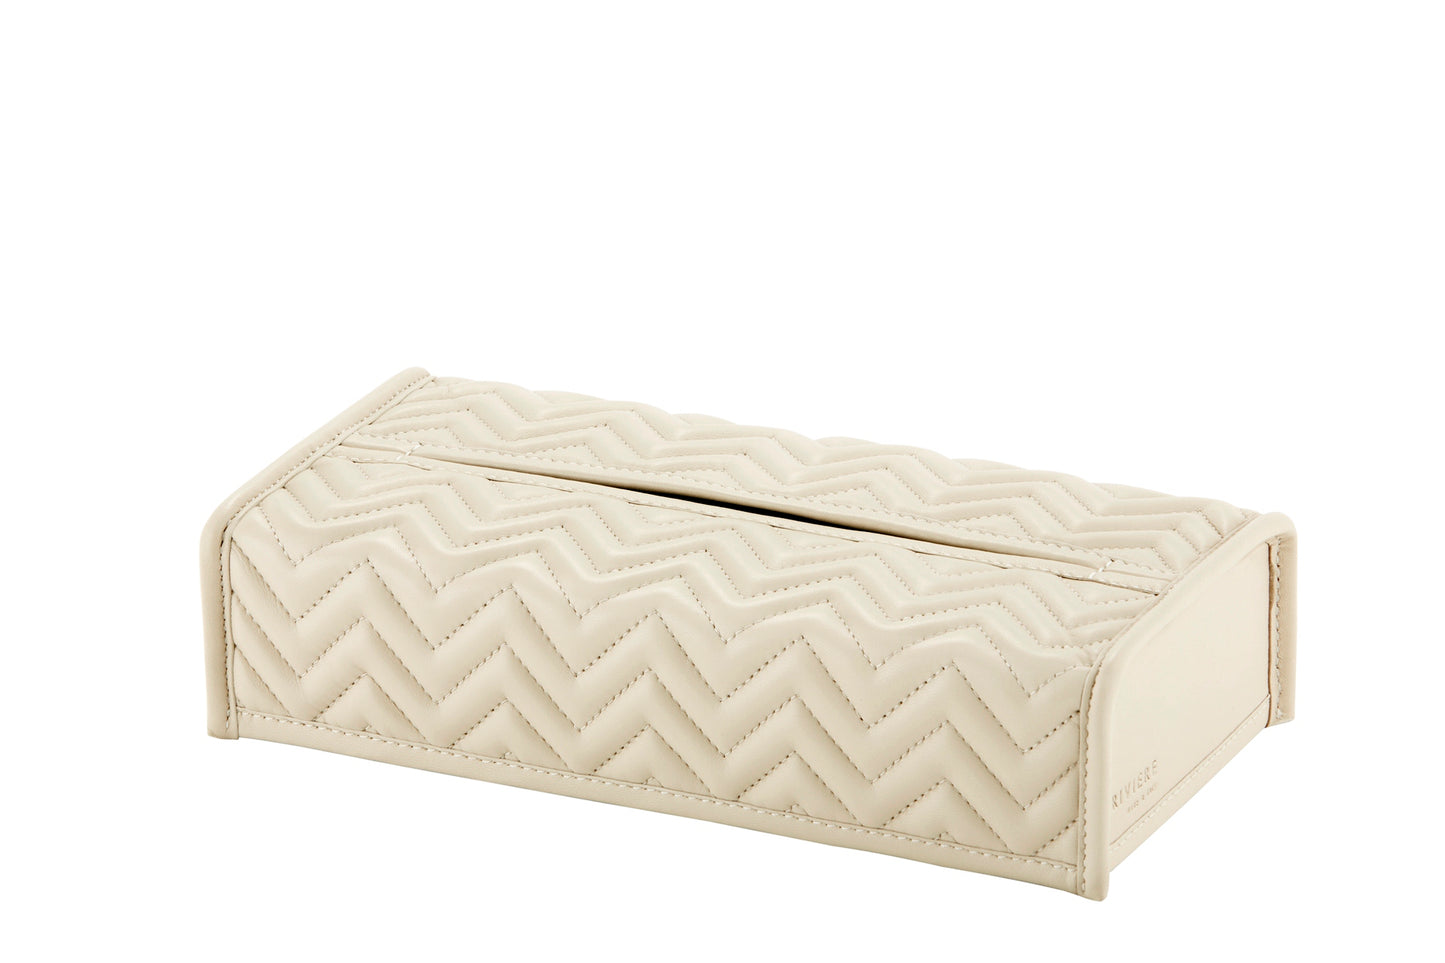 Riviere Elba Quilted Herringbone Leather Tissue Holder | Padded Leather Tissue Box Cover | Elegant Quilted Herringbone Design | Perfect for Yacht Decor | Explore a Range of Luxury Home Accessories at 2Jour Concierge, #1 luxury high-end gift & lifestyle shop